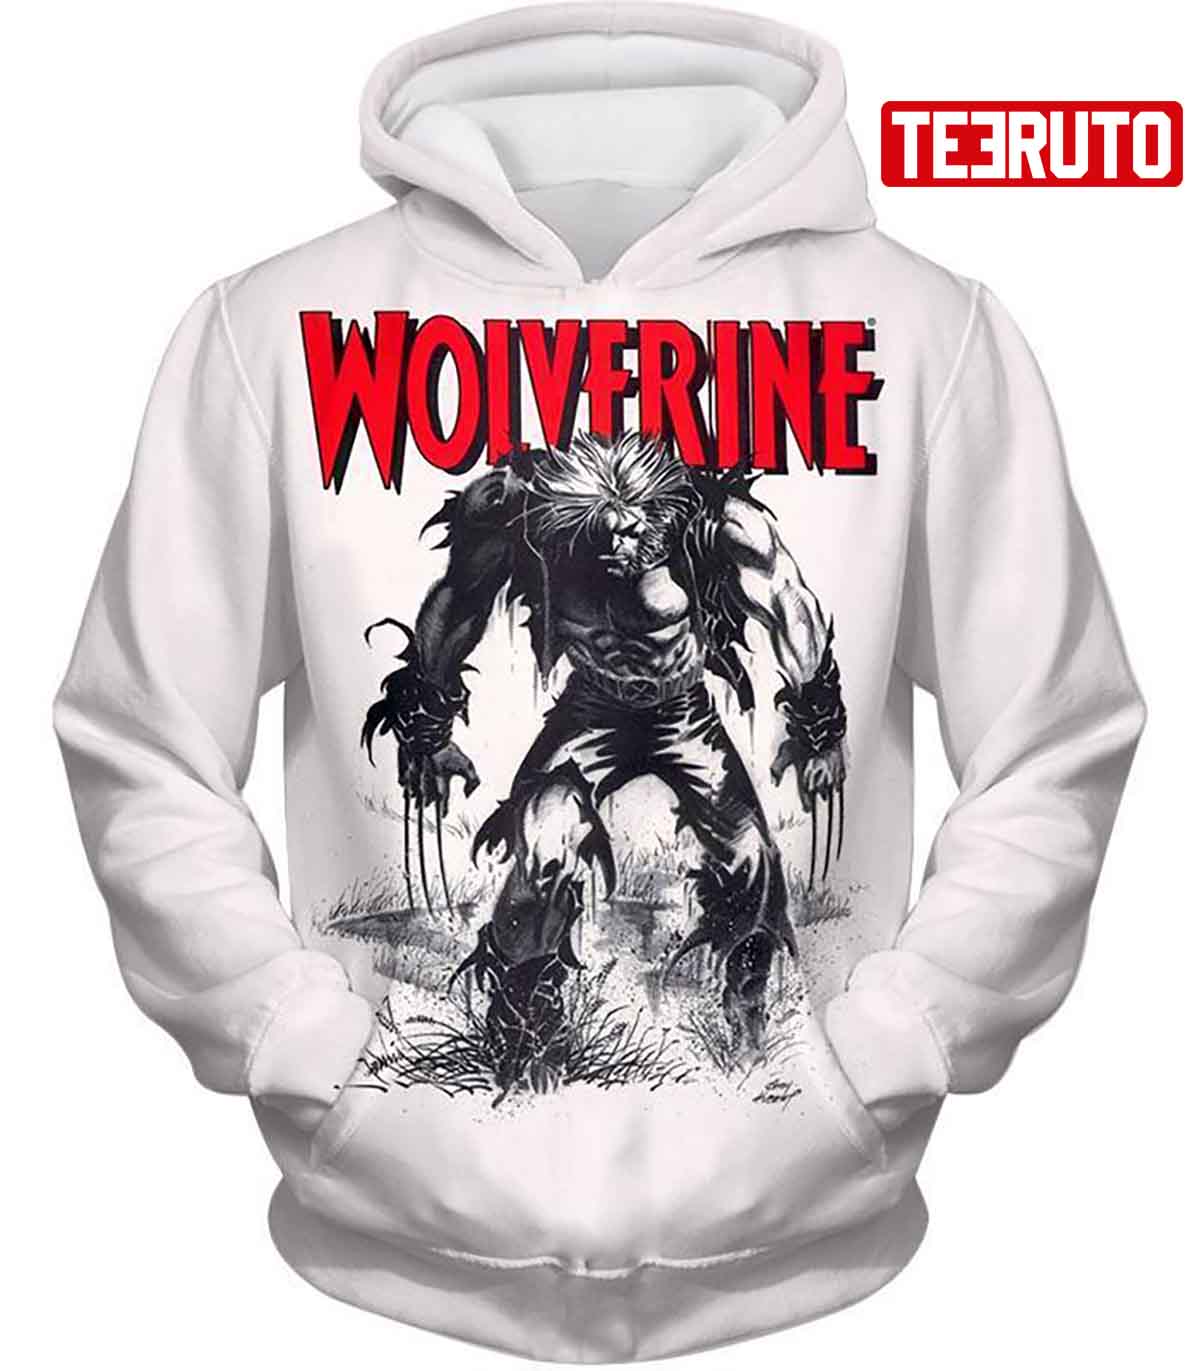 Animated Wolverine Promo Cool White Anime Hd 3d Aop Hoodie